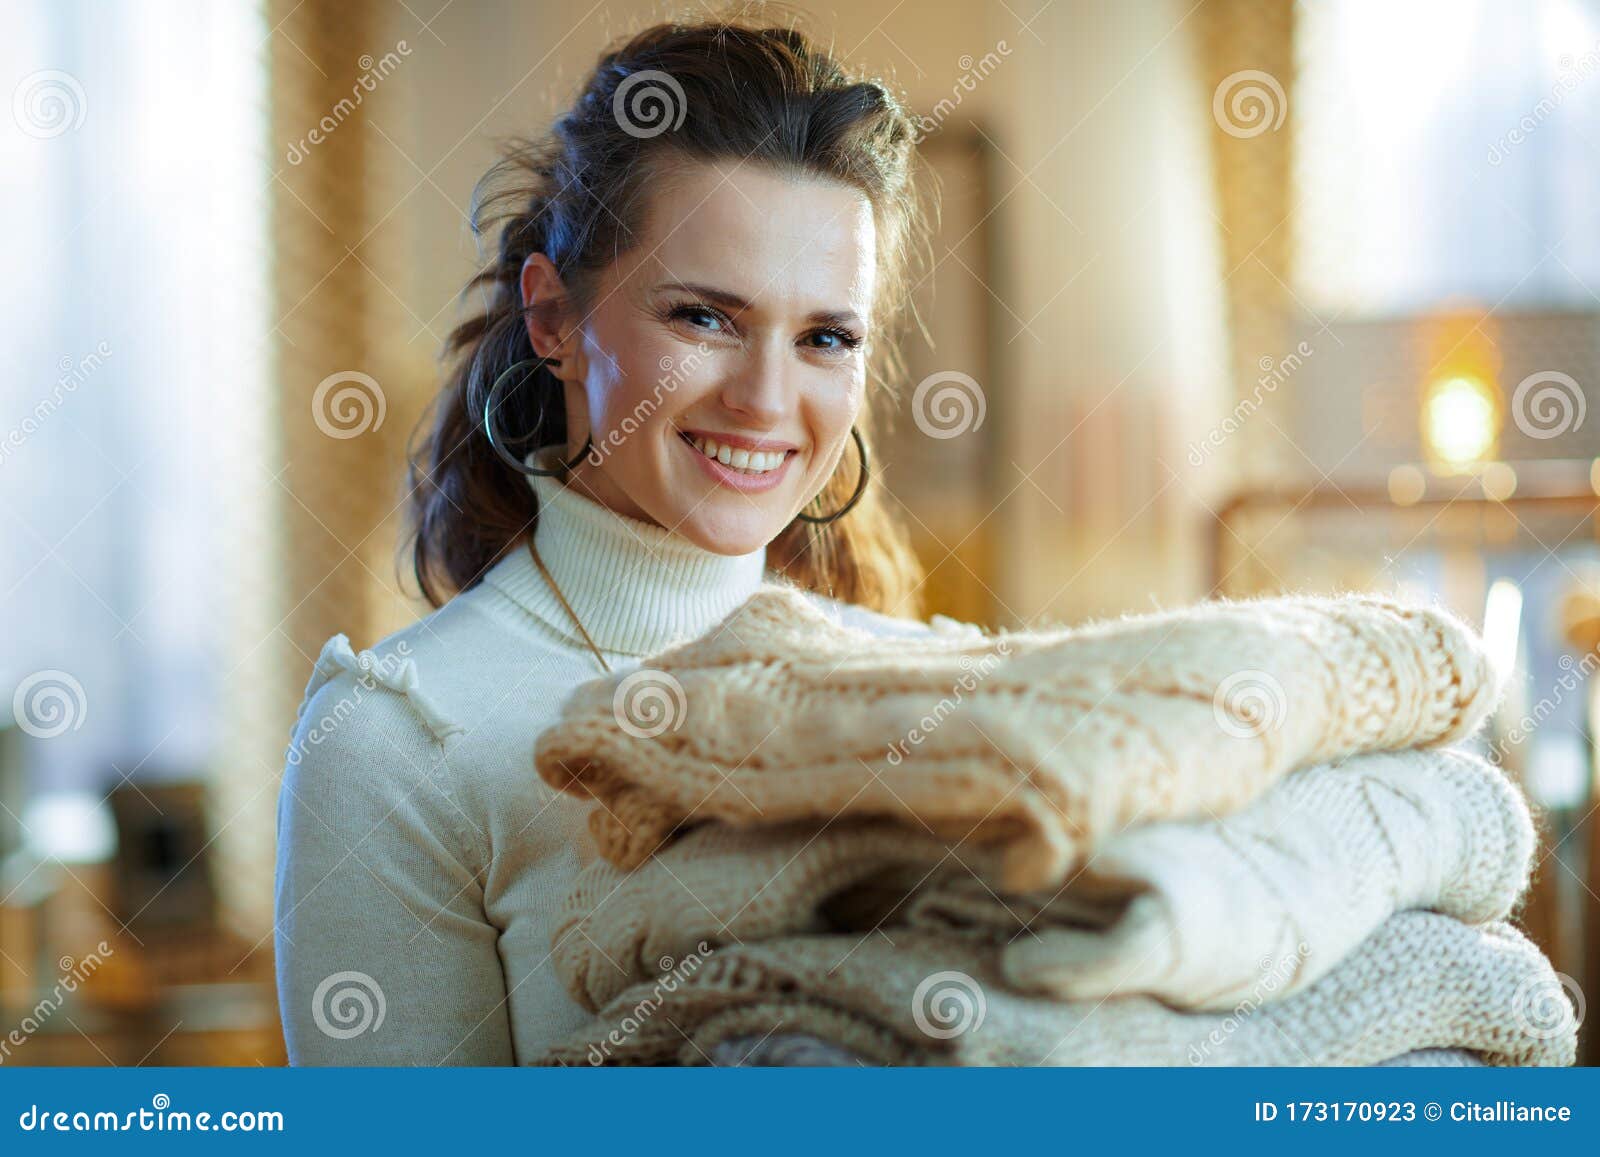 Smiling Modern Middle Age Woman Holding Pile of Sweaters Stock Image ...